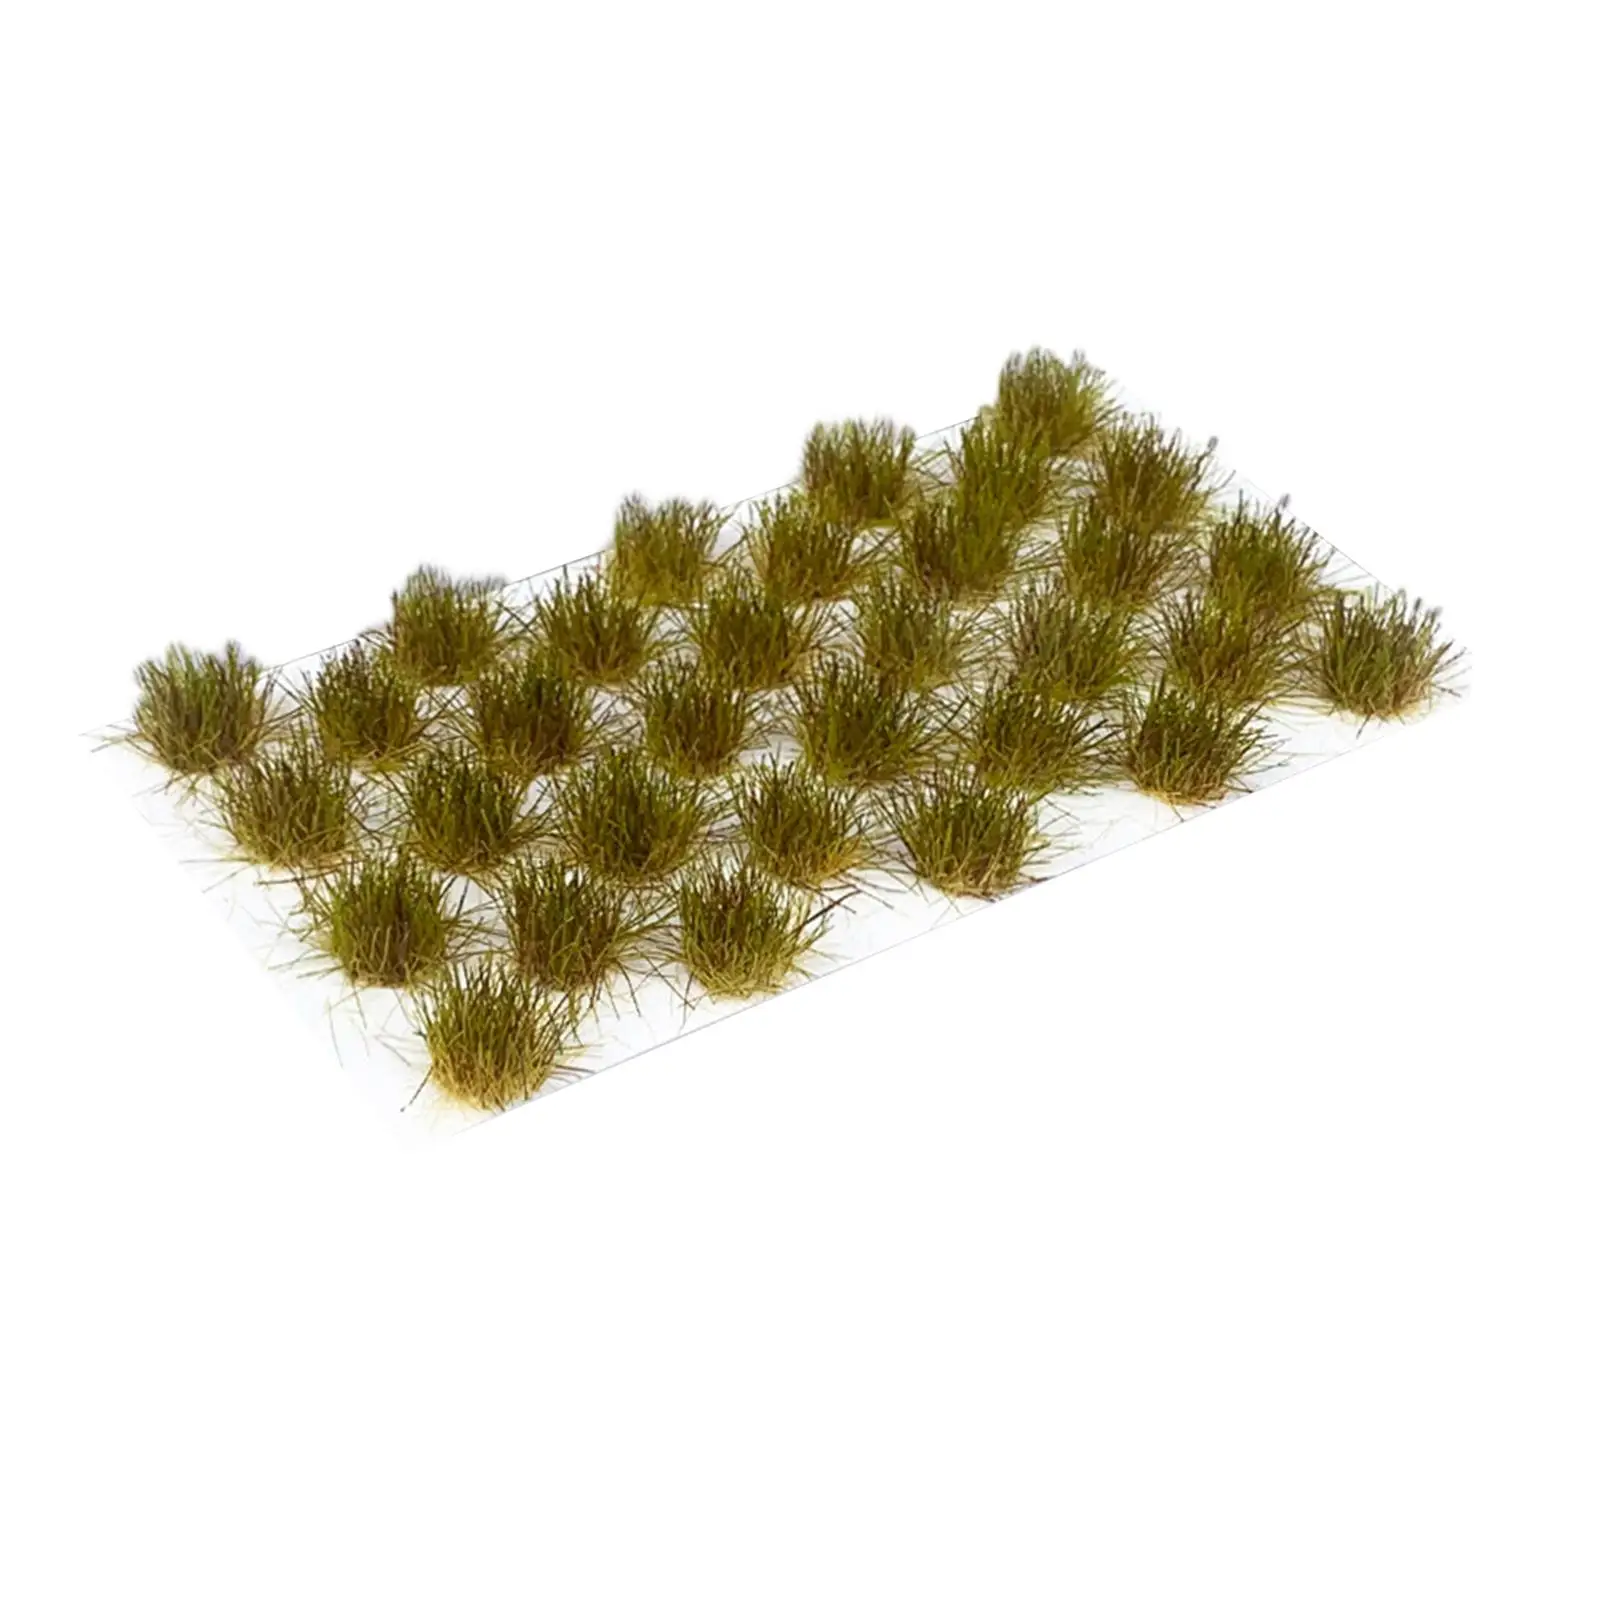 Portable Grass Tufts Grass Tuft Model for Building Model Railroad Scenery